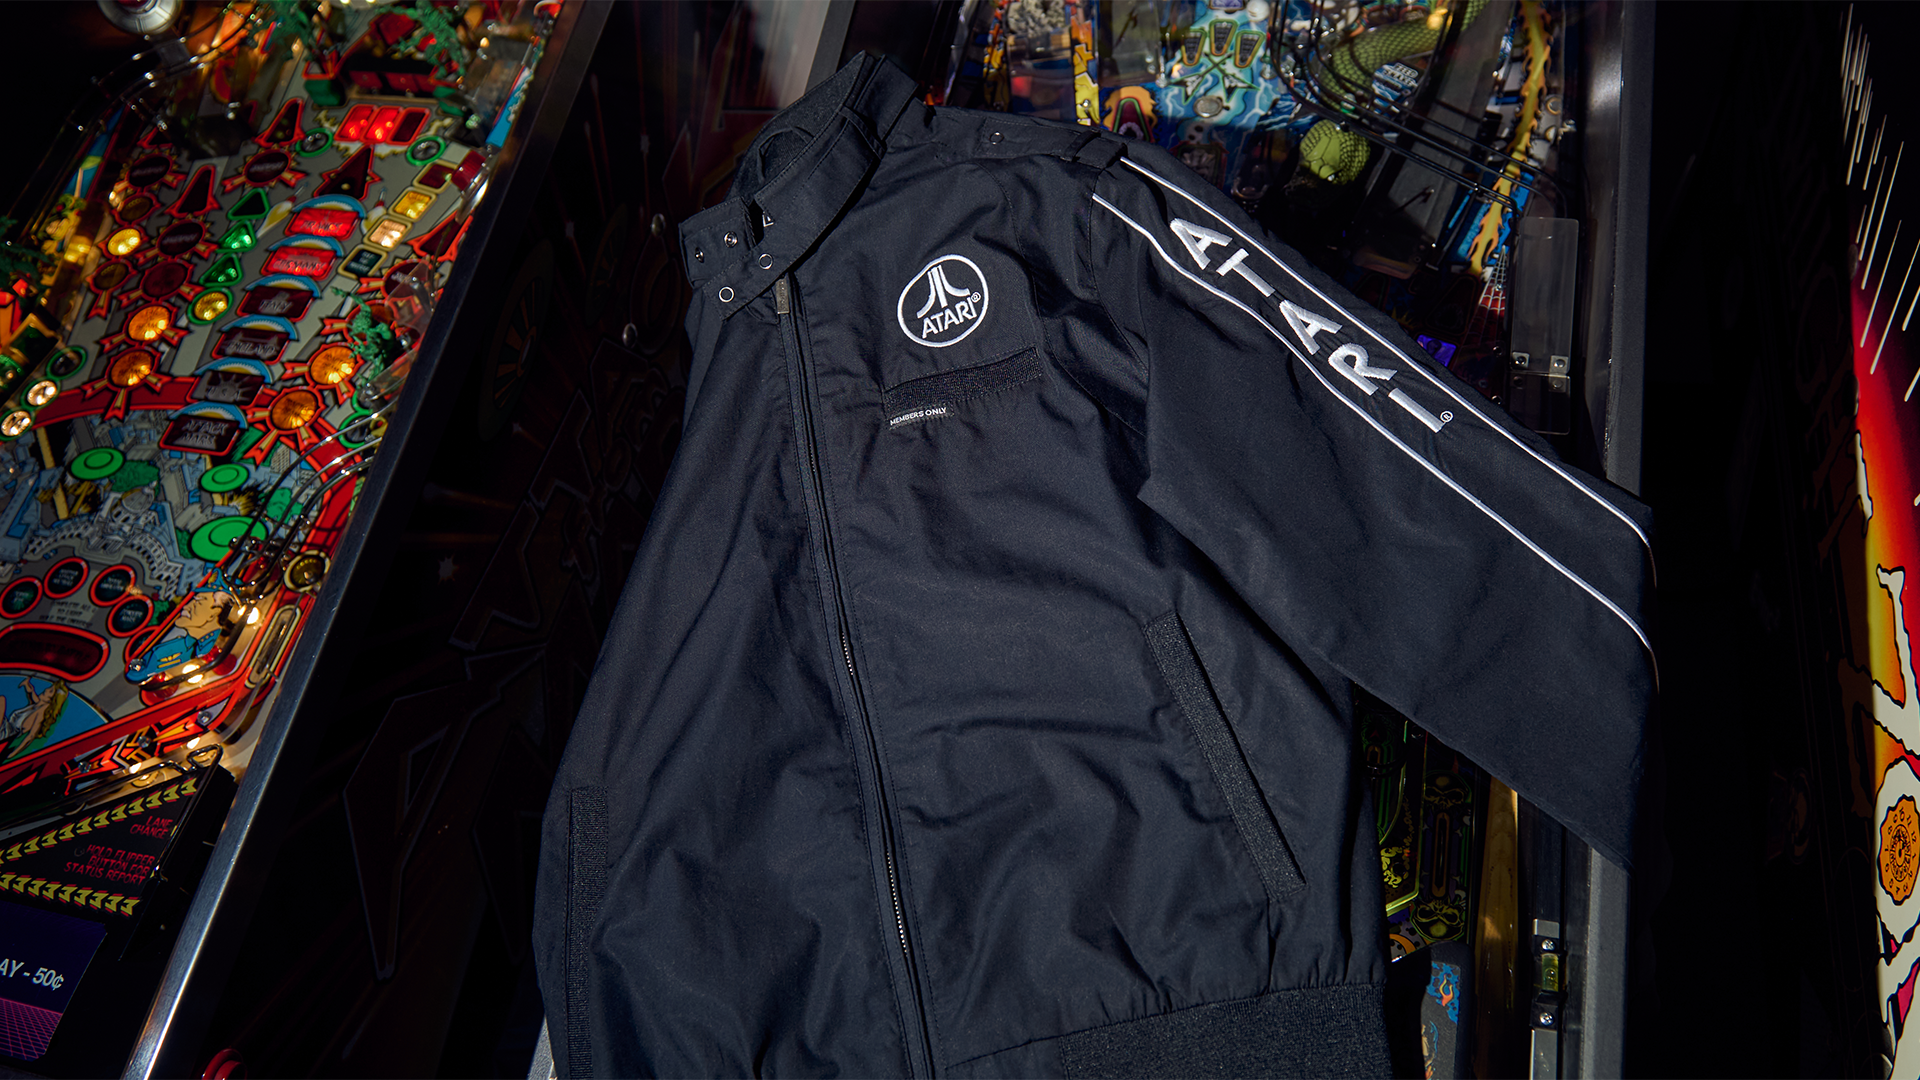 Atari Unveils Exclusive Members Only Retro-Inspired Jackets